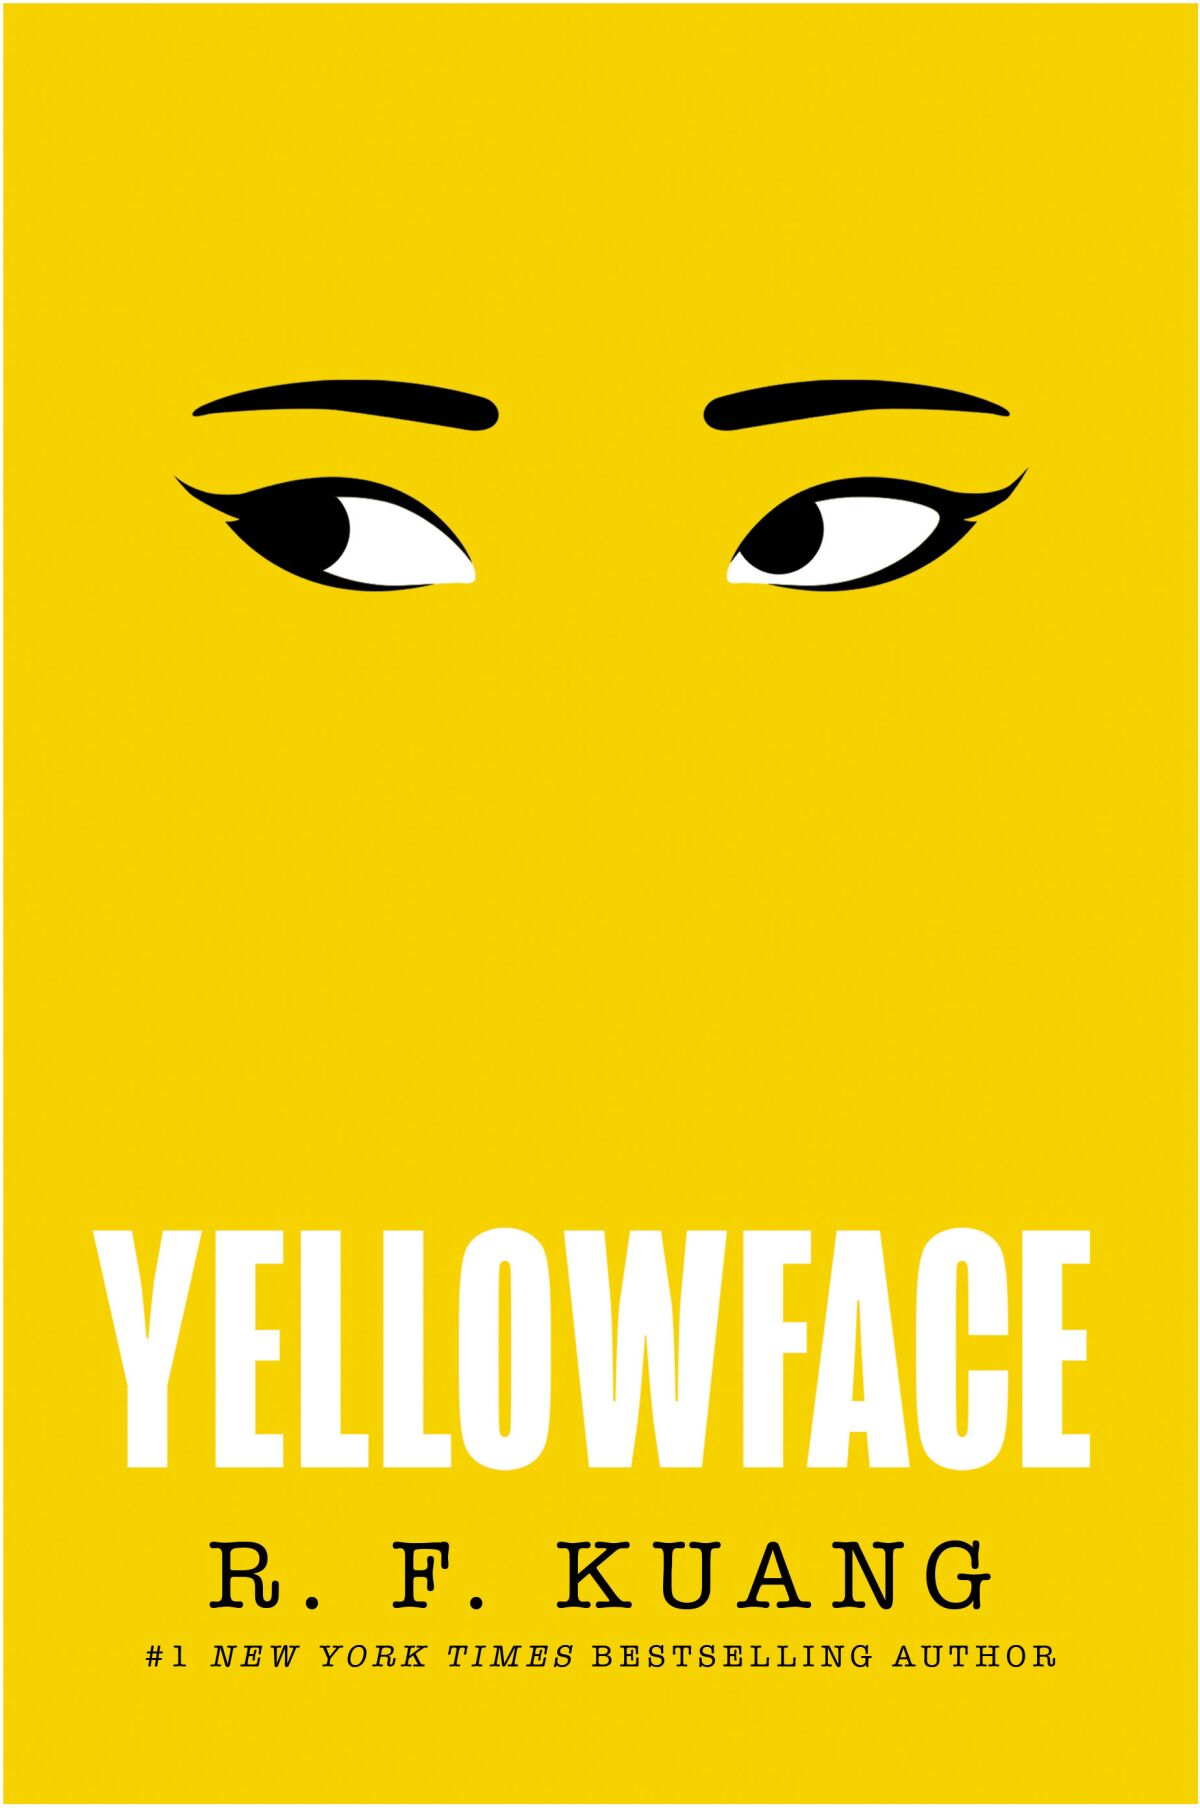 'Yellowface,' by R. F. Kuang bookcover is mostly yellow with two eyes and eyebrows